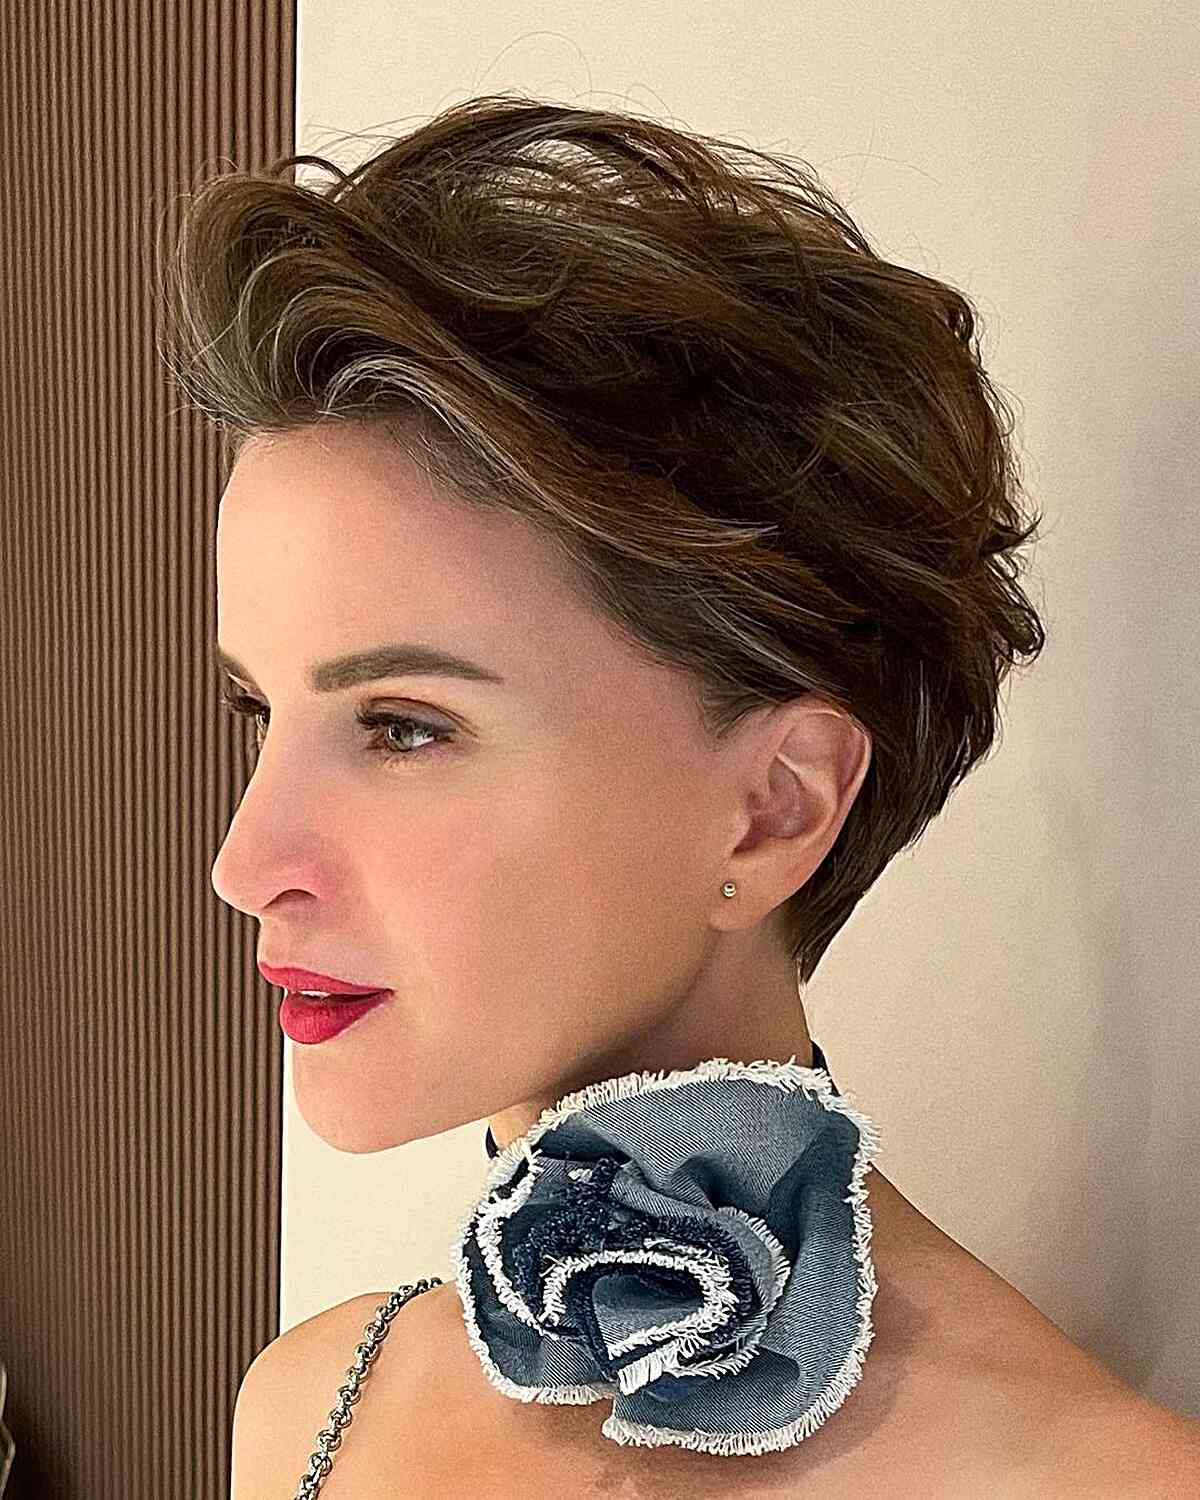 Swept-Back Long Pixie Cut for Thin Hair and for girls with short brown hair